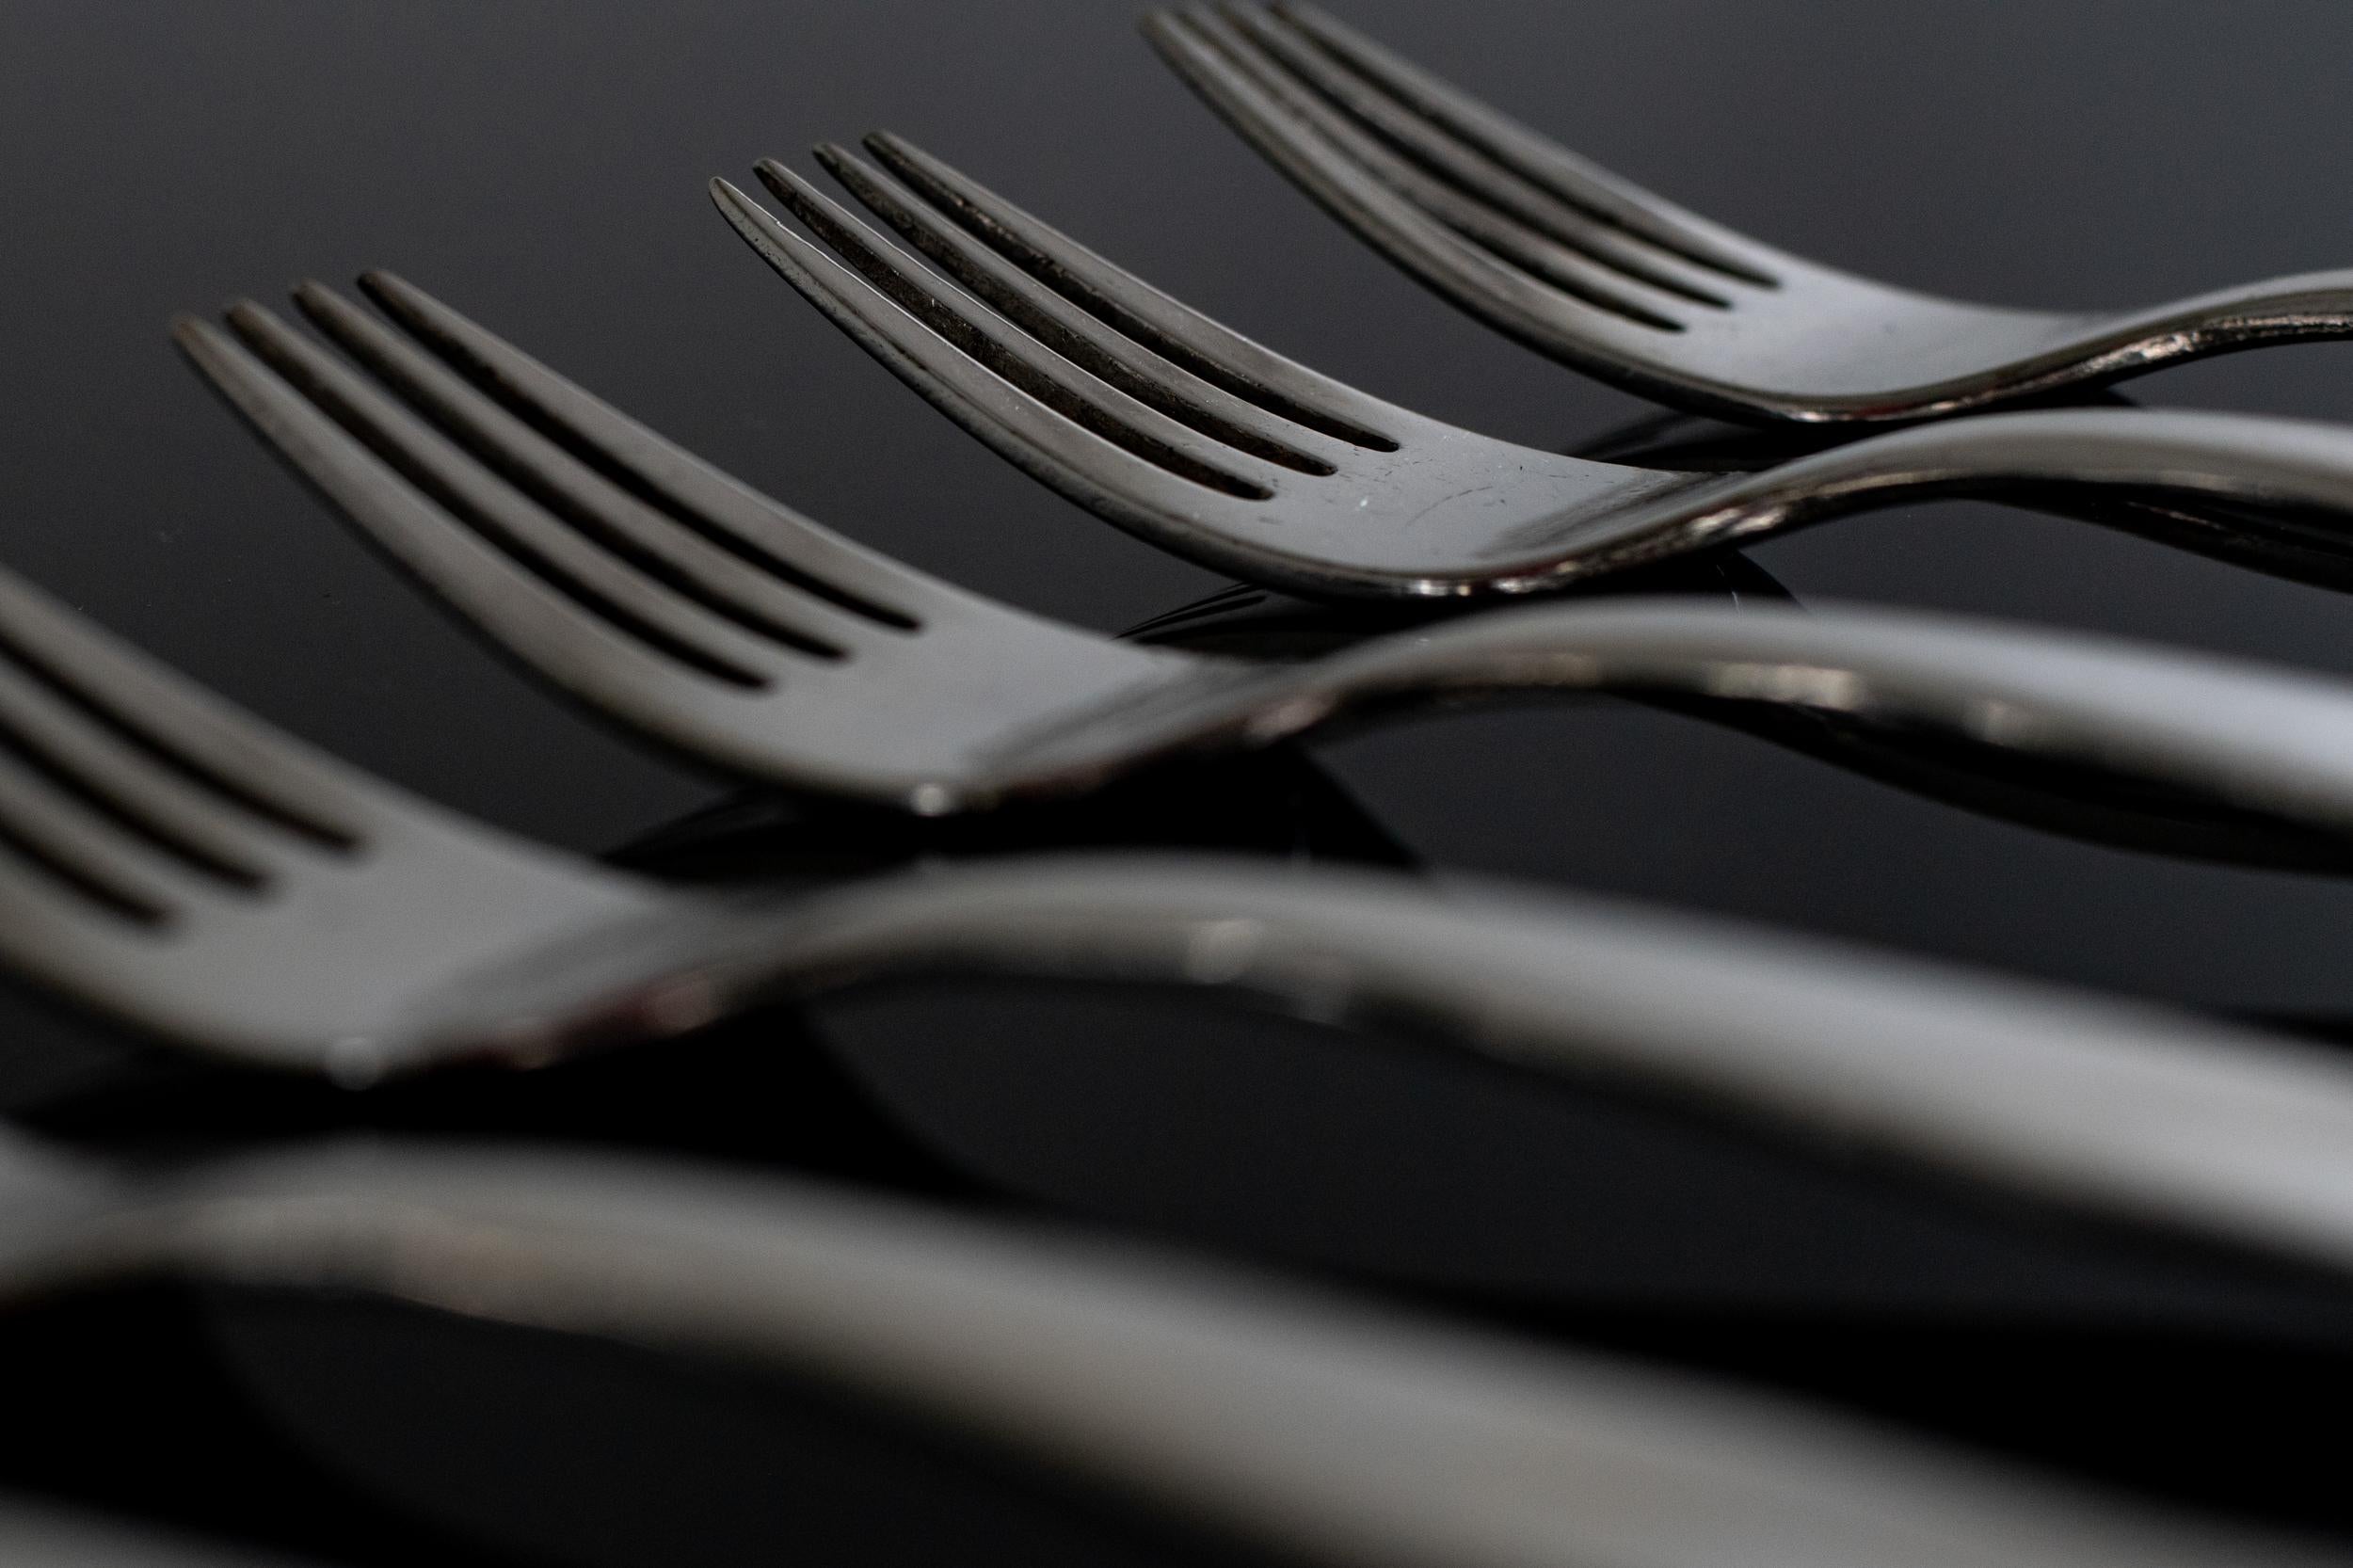 Mid-20th Century Gio Ponti Cutlery Set for Six in Nickel Silver by Krupp Italy 1950s For Sale